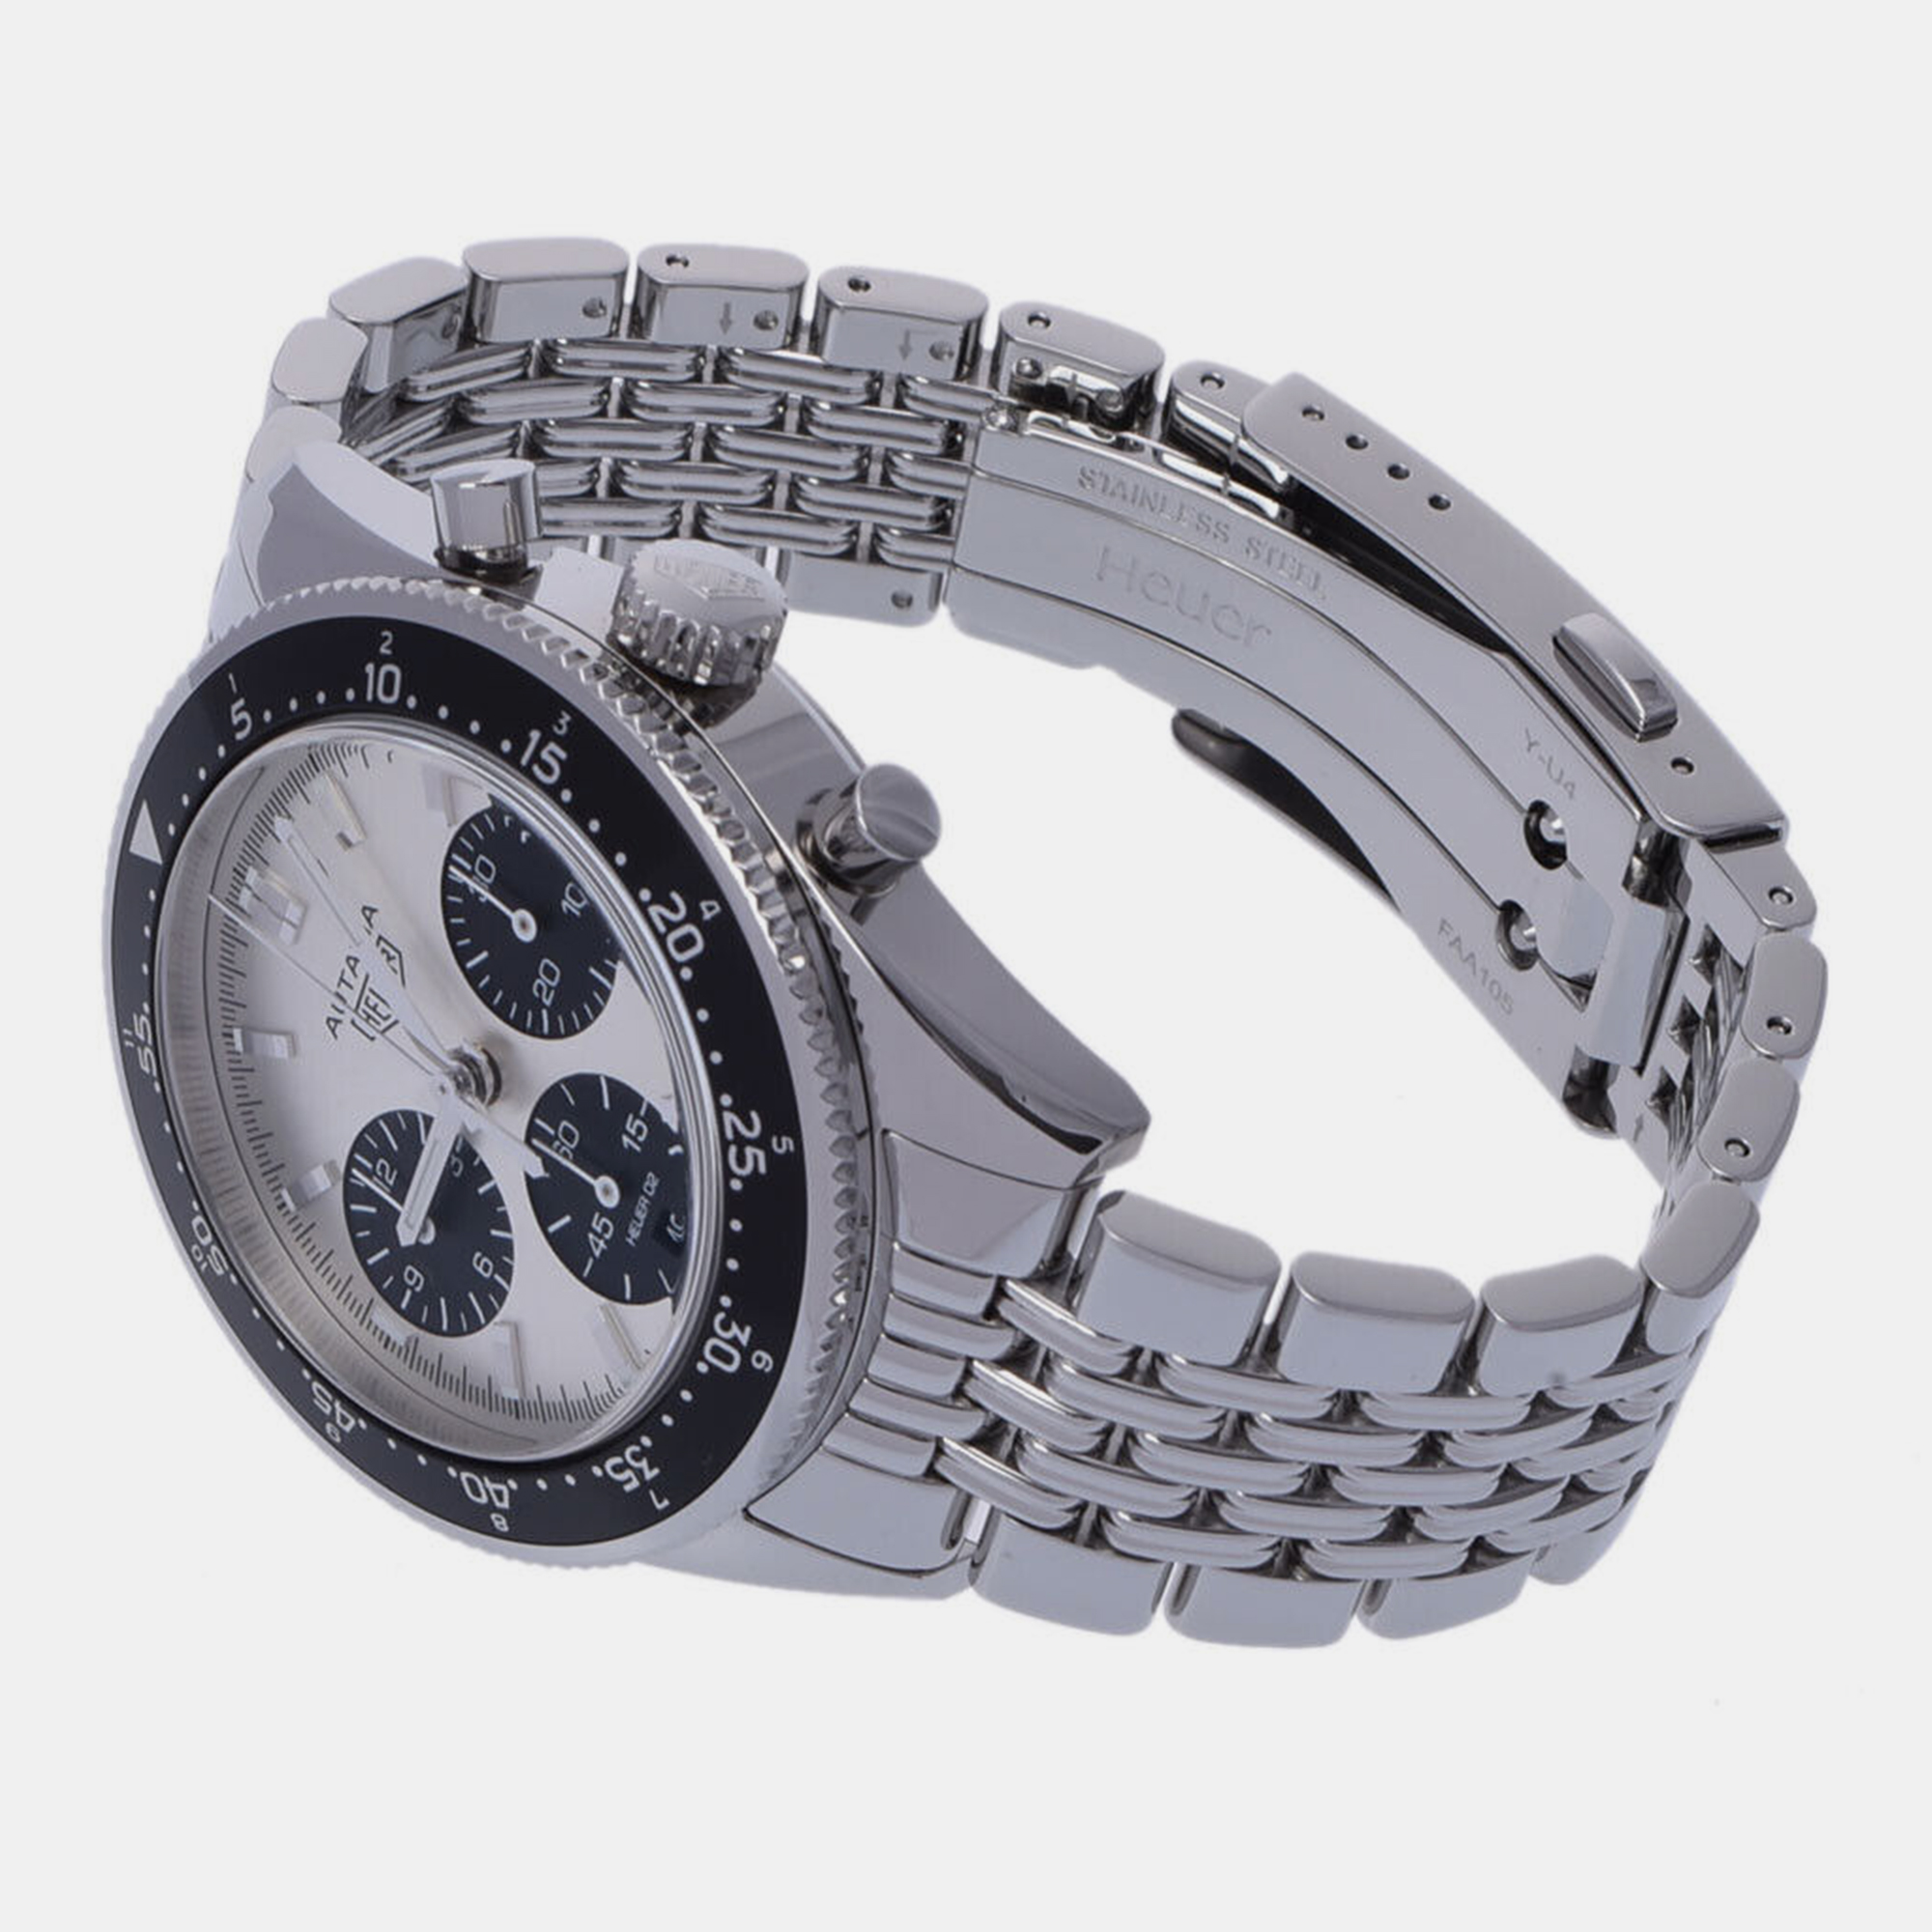 Tag Heuer Silver Stainless Steel Autavia Heritage CBE2111.BA0687 Automatic Chronograph Men's Wristwatch 42 Mm